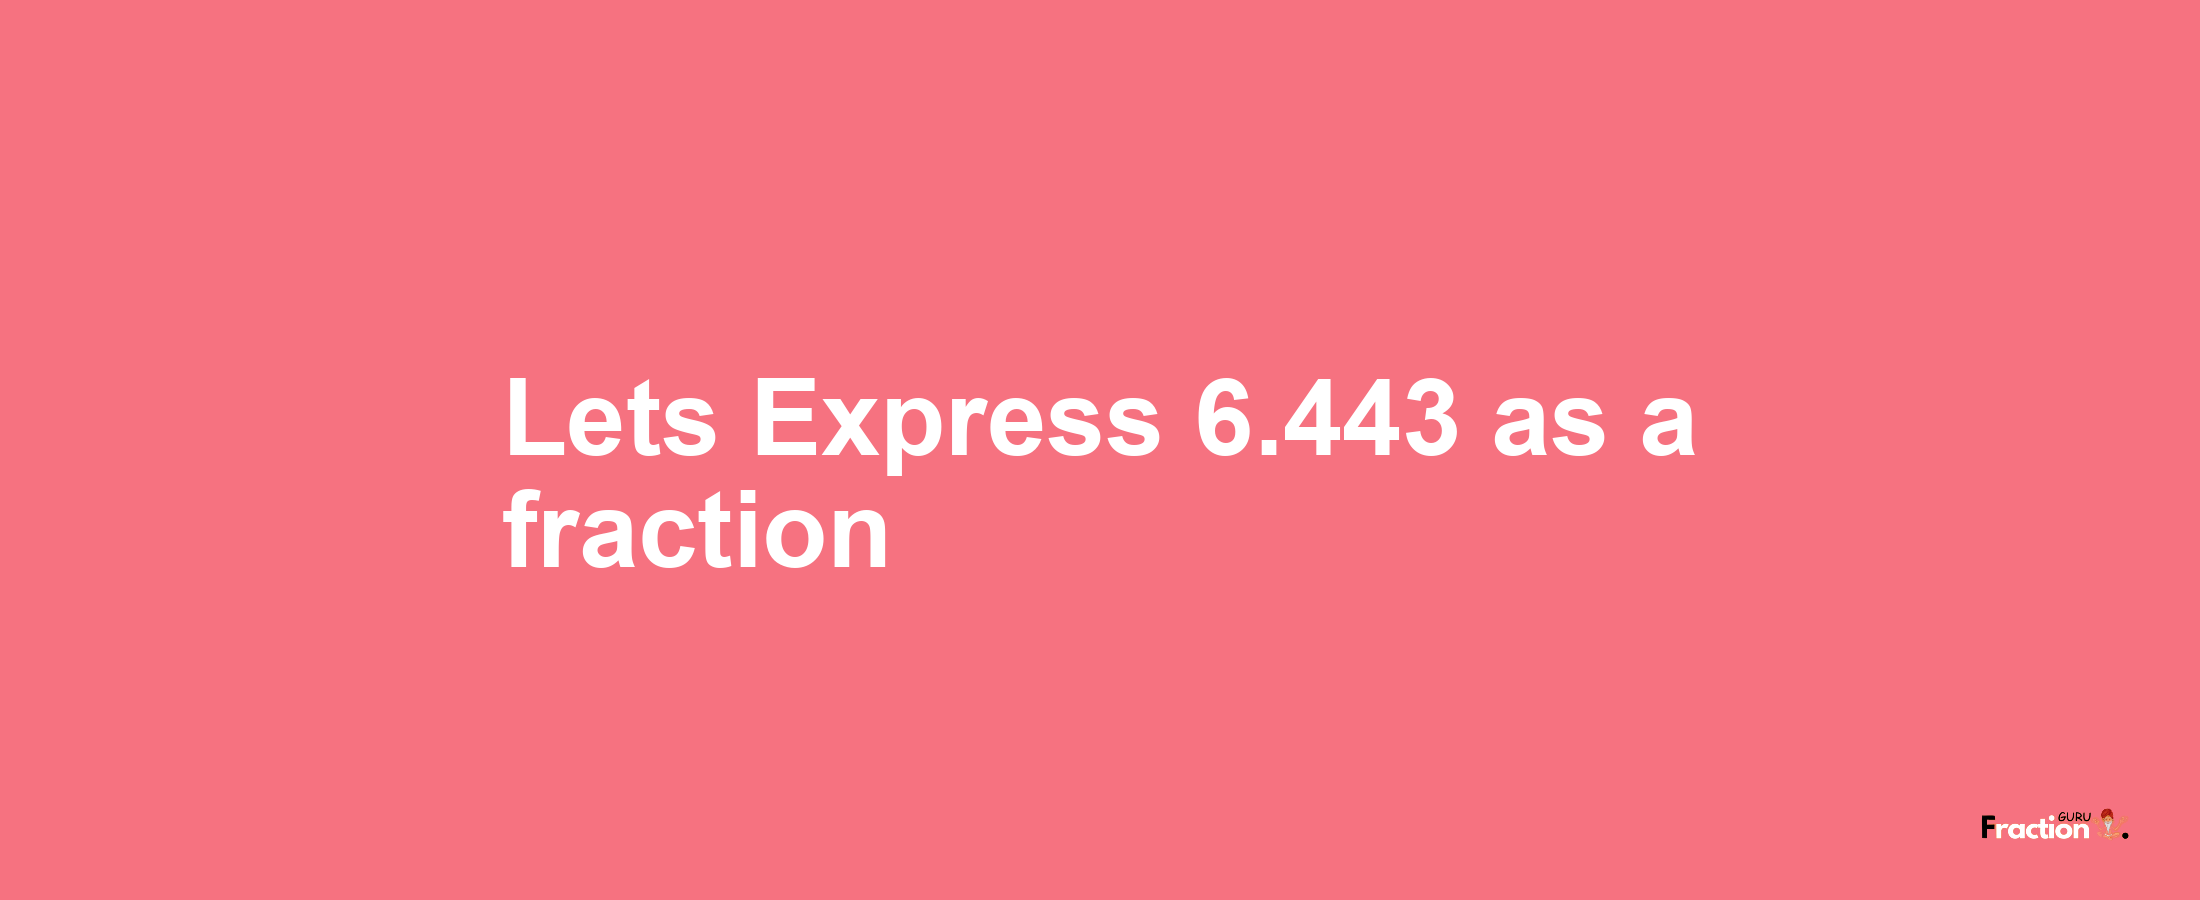 Lets Express 6.443 as afraction